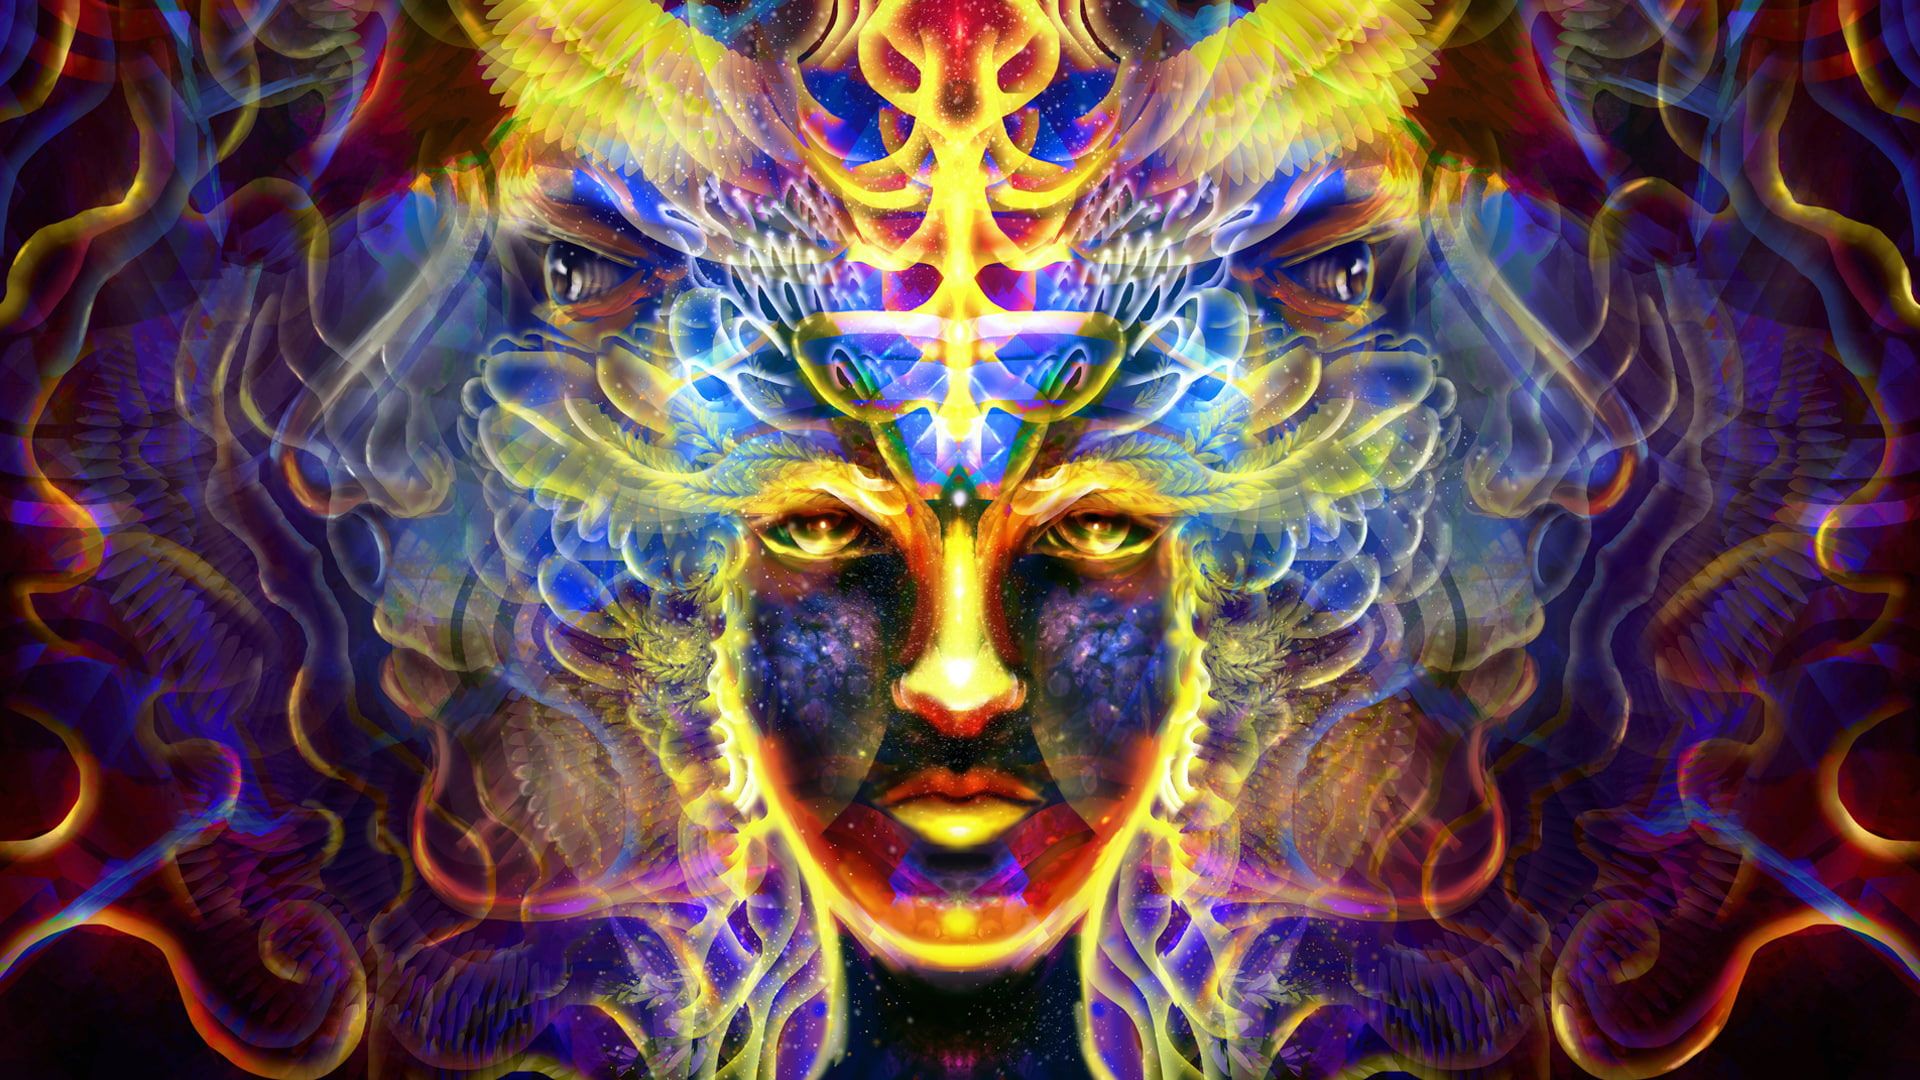 Trippy wallpaper, psychedelic, colorful, fractal, front view, portrait • Wallpaper For You HD Wallpaper For Desktop & Mobile